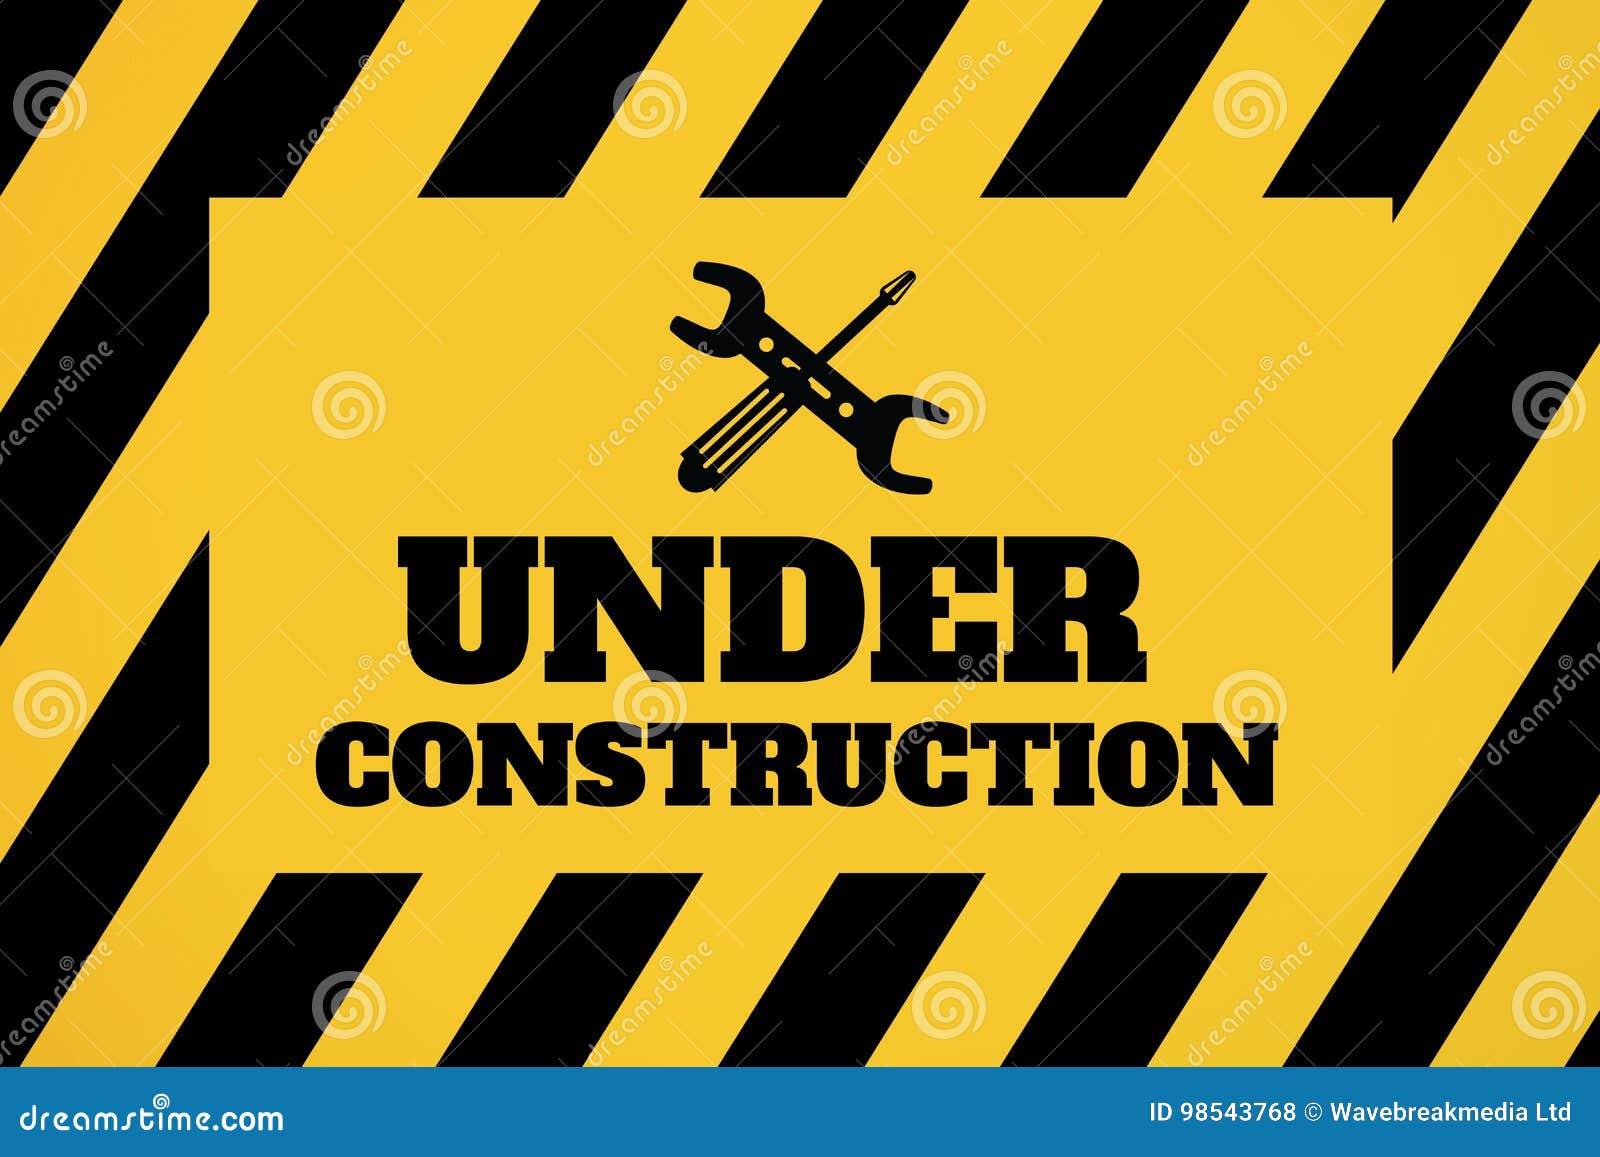 Under Construction Text with Tools Graphics Against Yellow and Black ...